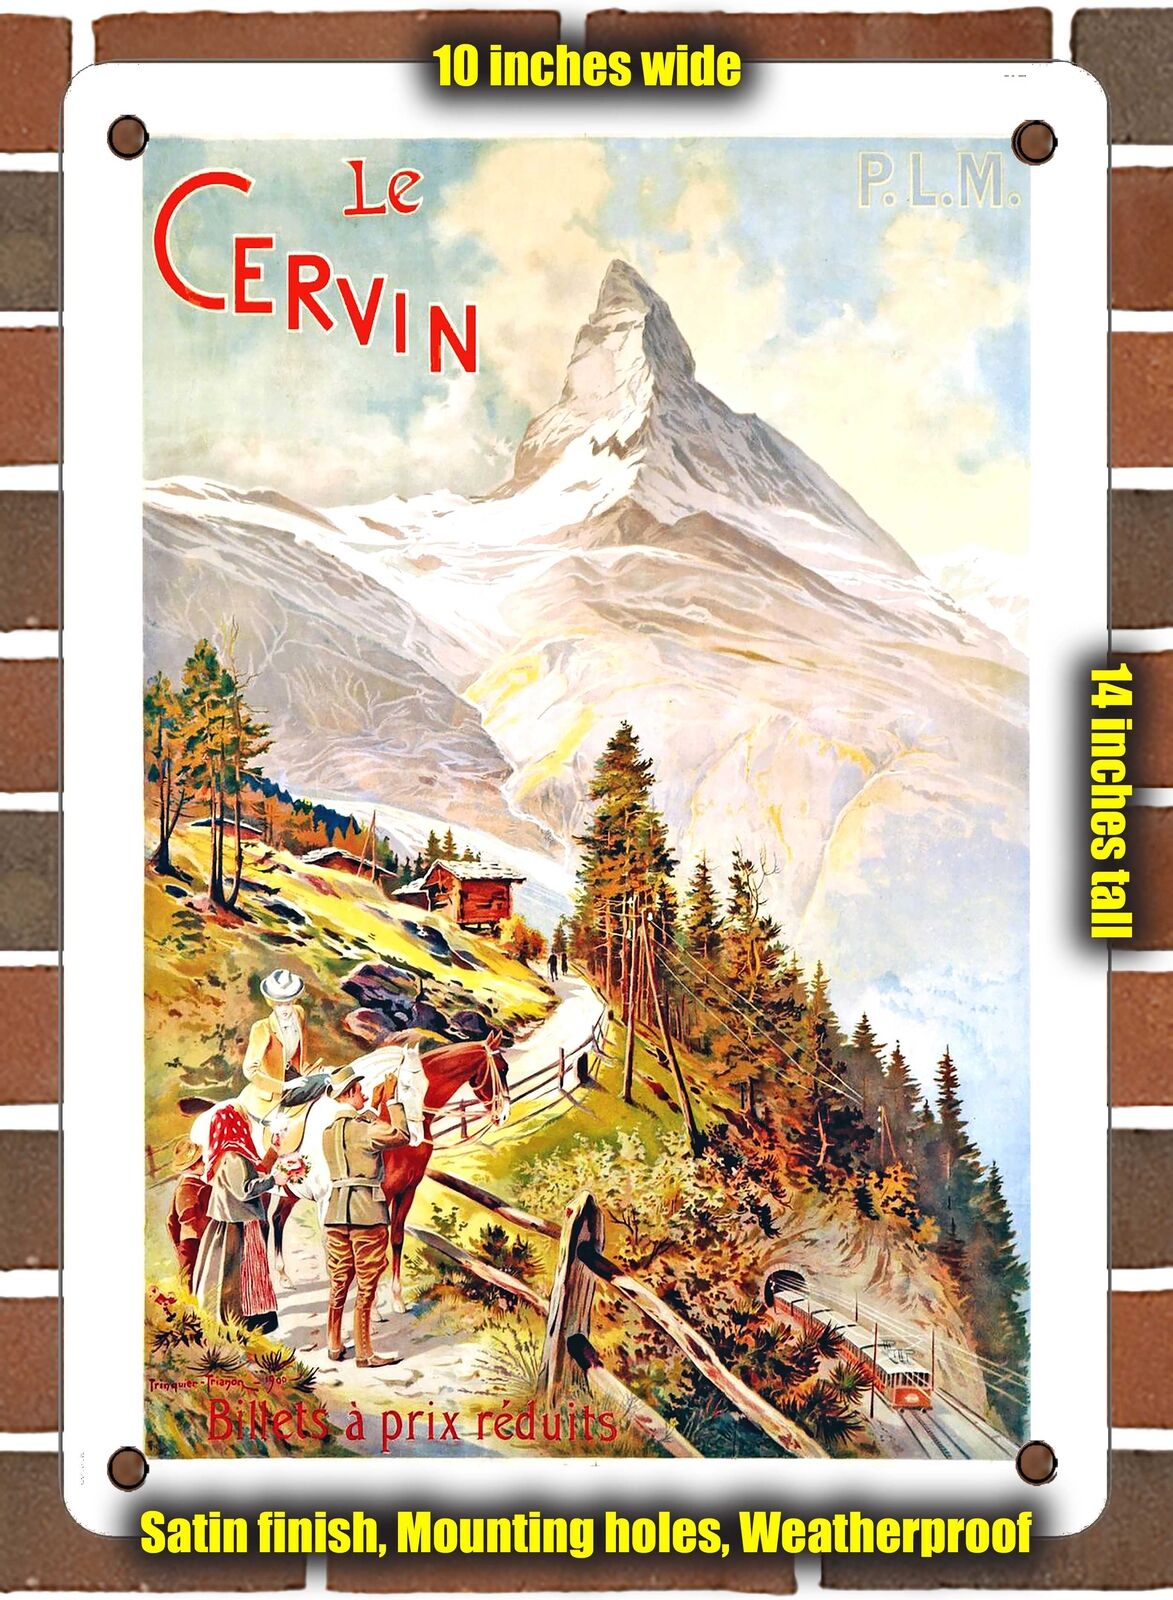 METAL SIGN - 1900 Louis Le Cervin PLM Reduced Price Tickets - 10x14 Inches